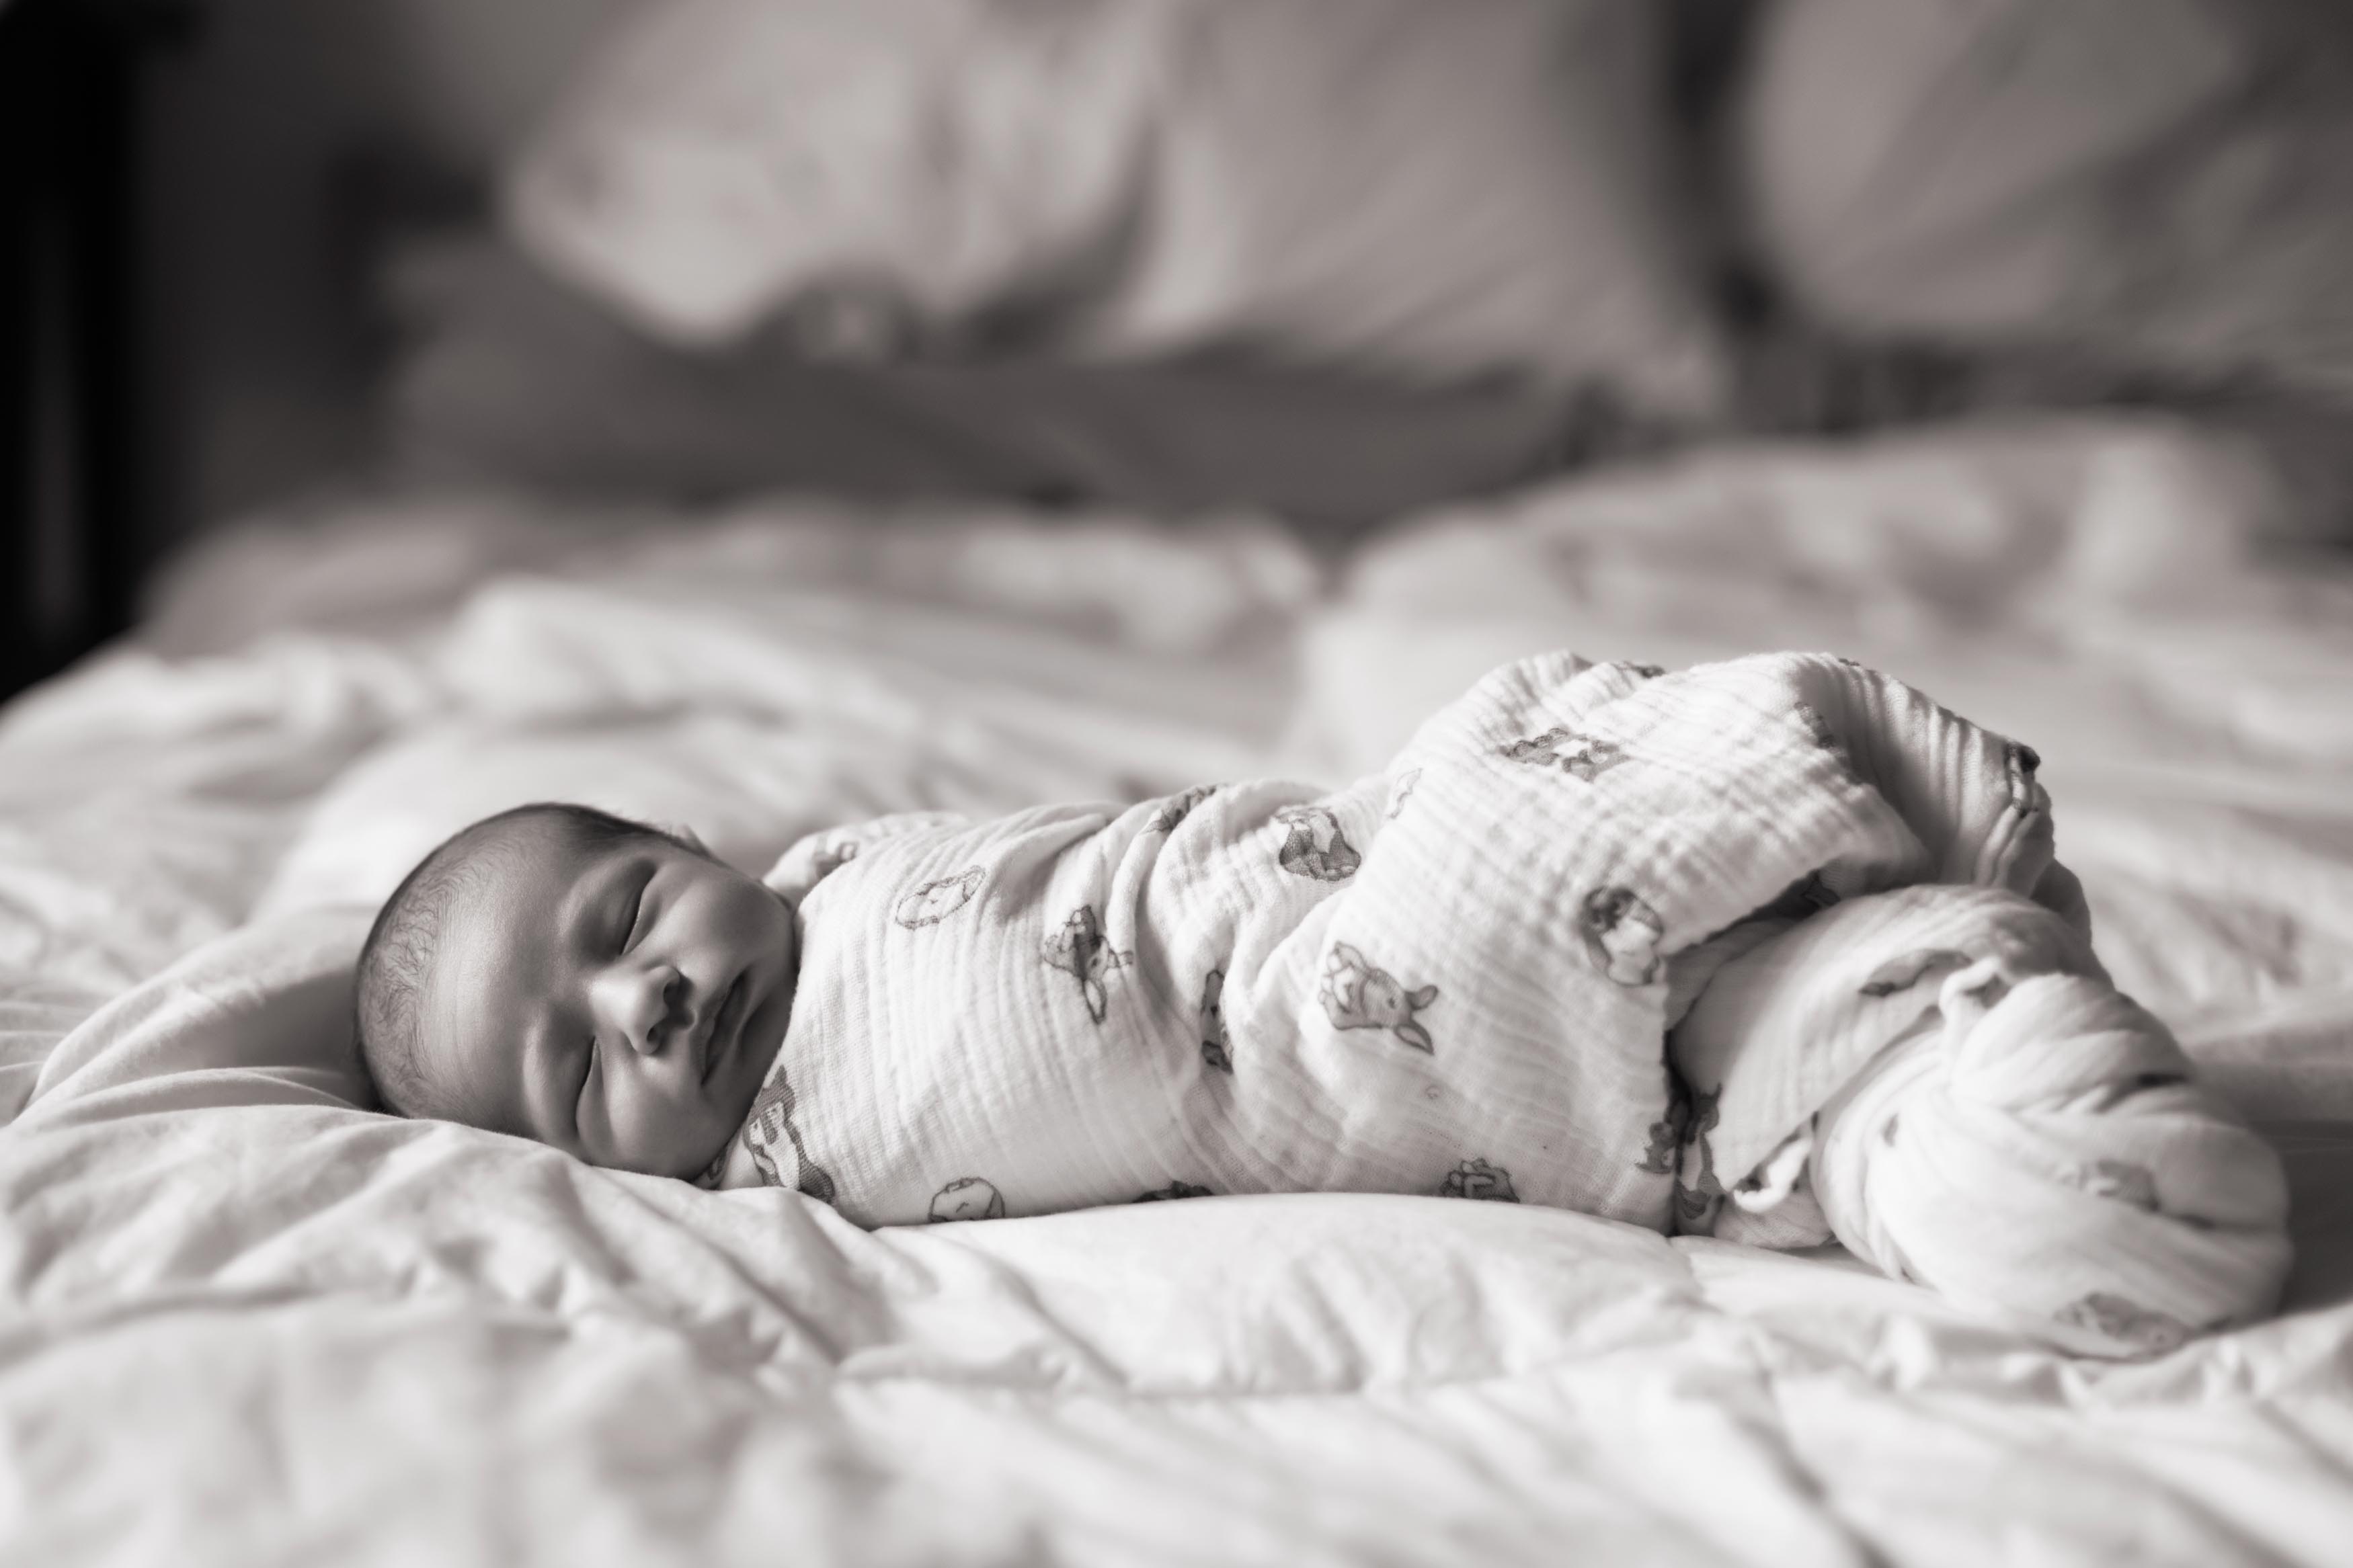 Black and white newborn photo on a bed.